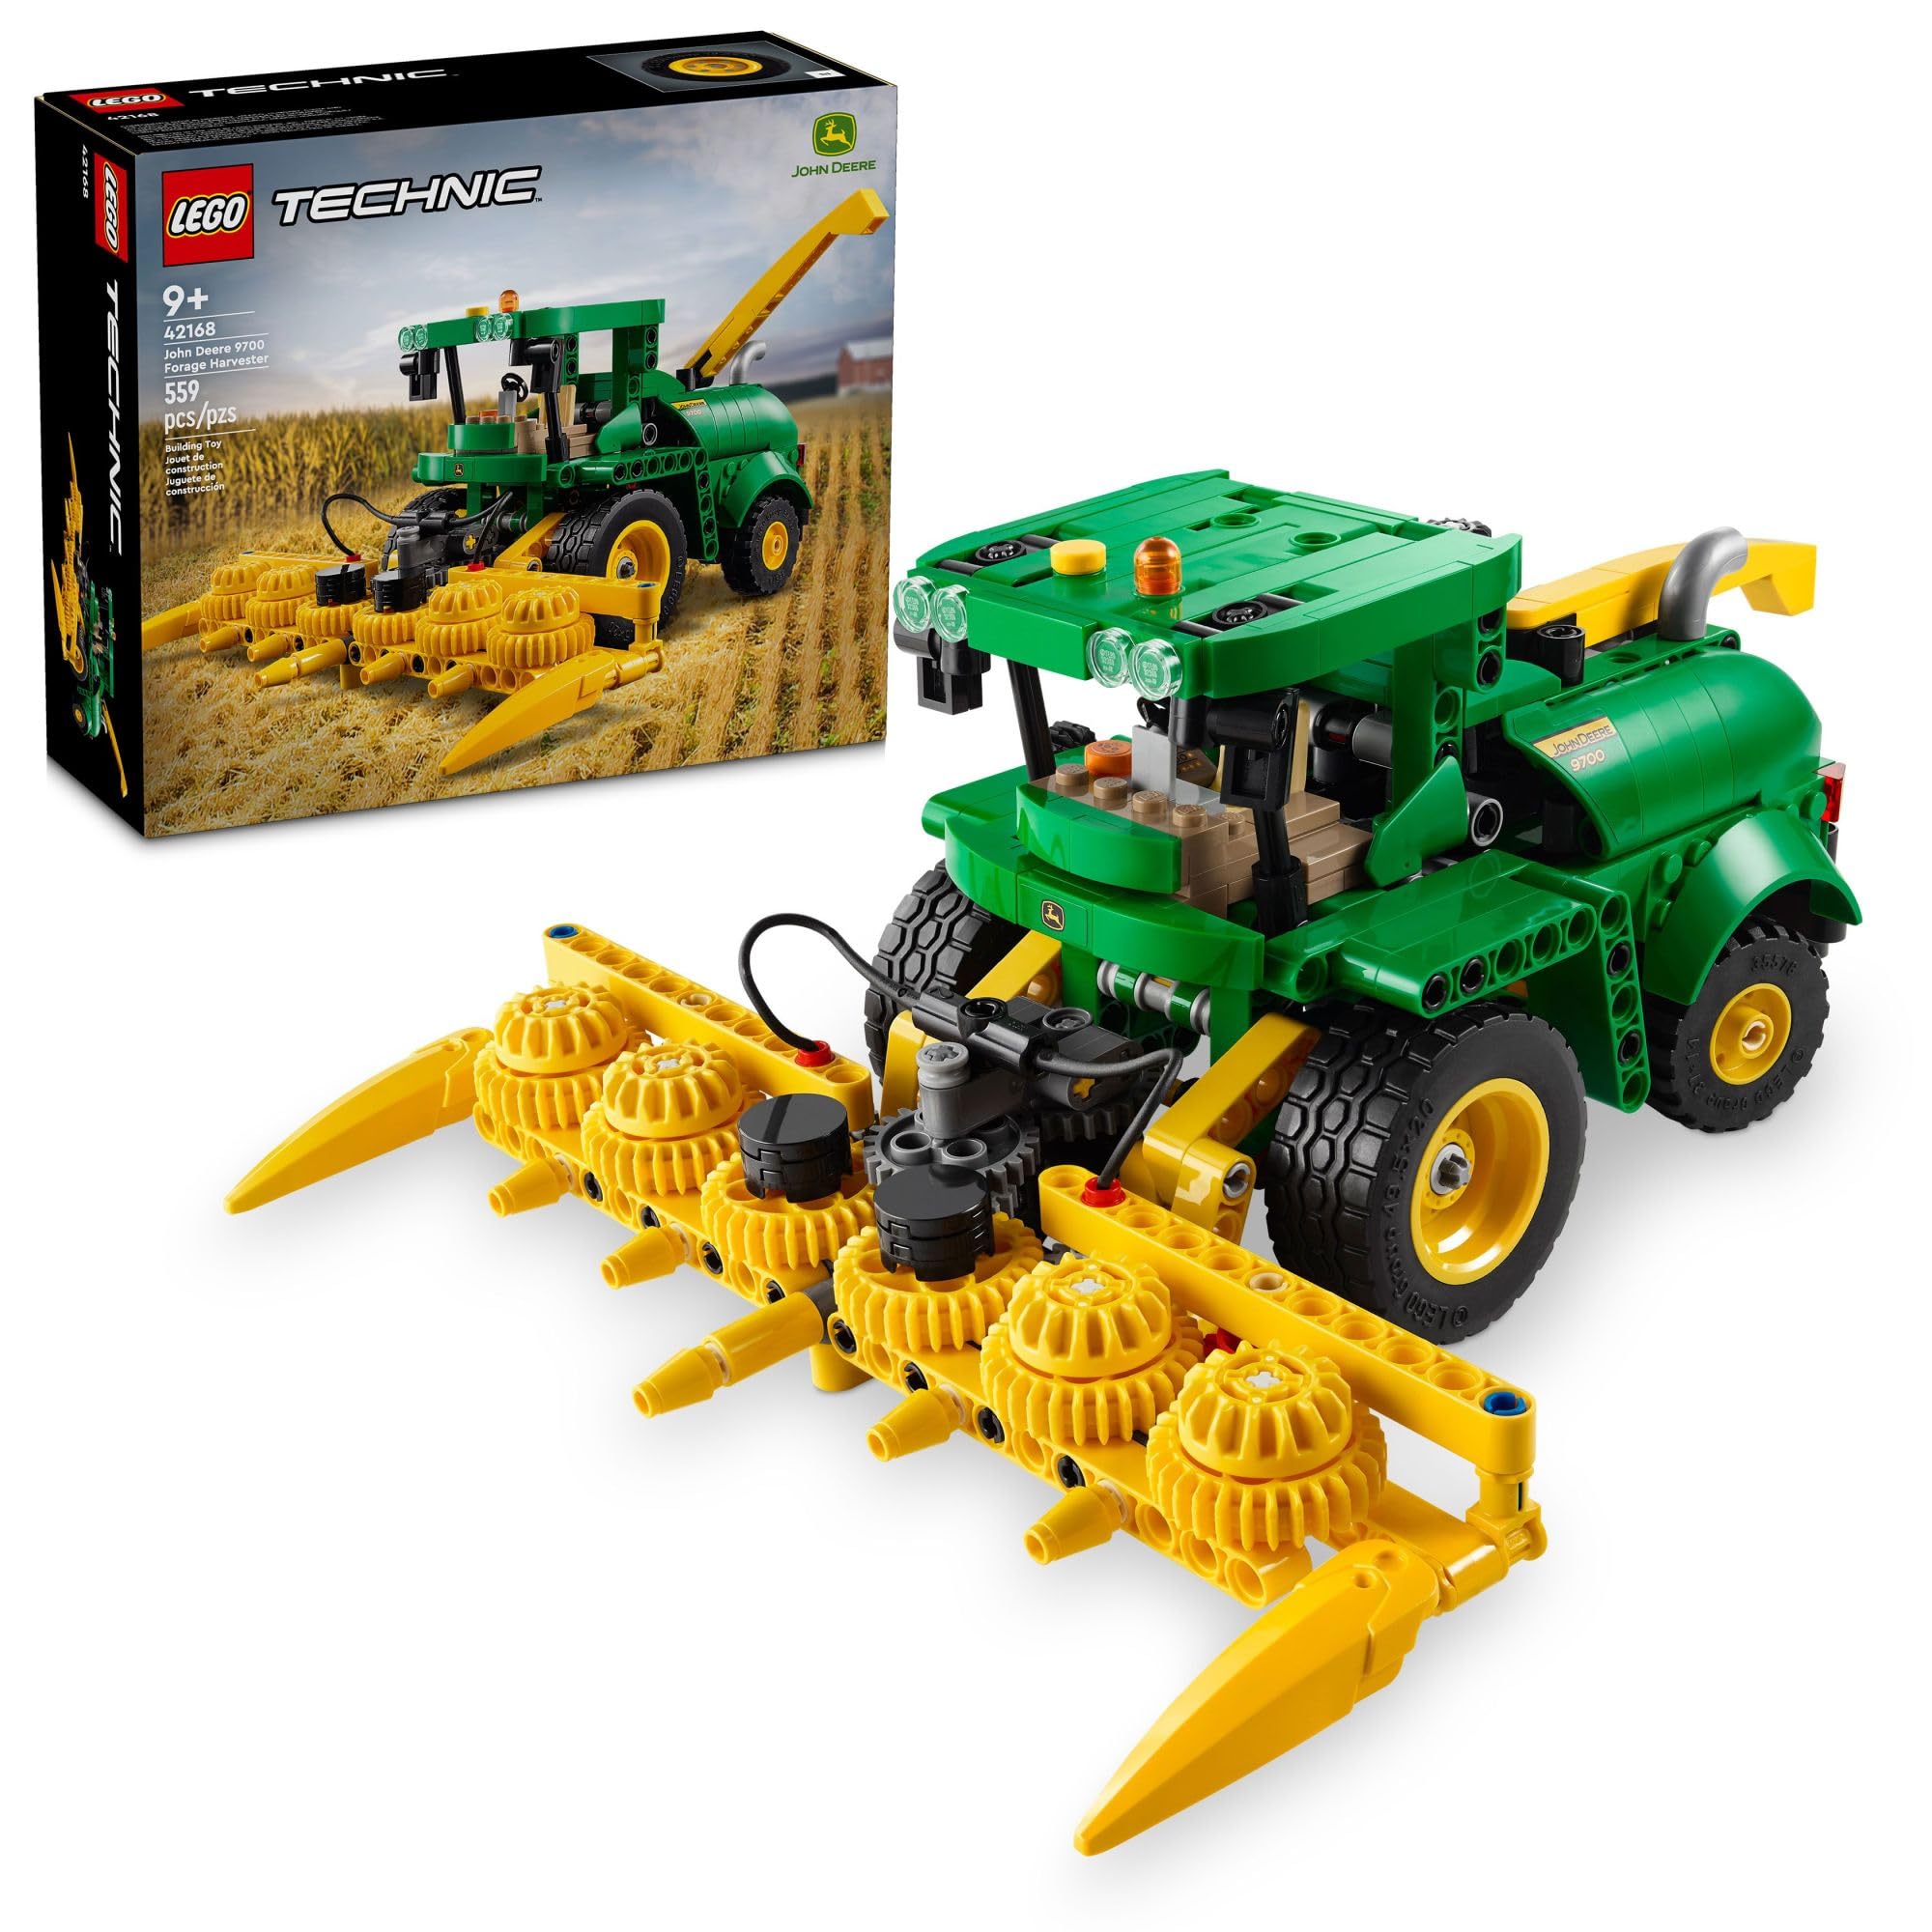 LEGO Technic John Deere 9700 Forage Harvester Tractor Toy, Buildable Farm Toy for Imaginative Play, Kids Truck Gift for Boys and Girls Ages 9 and Up who Love Farming Vehicles, 42168